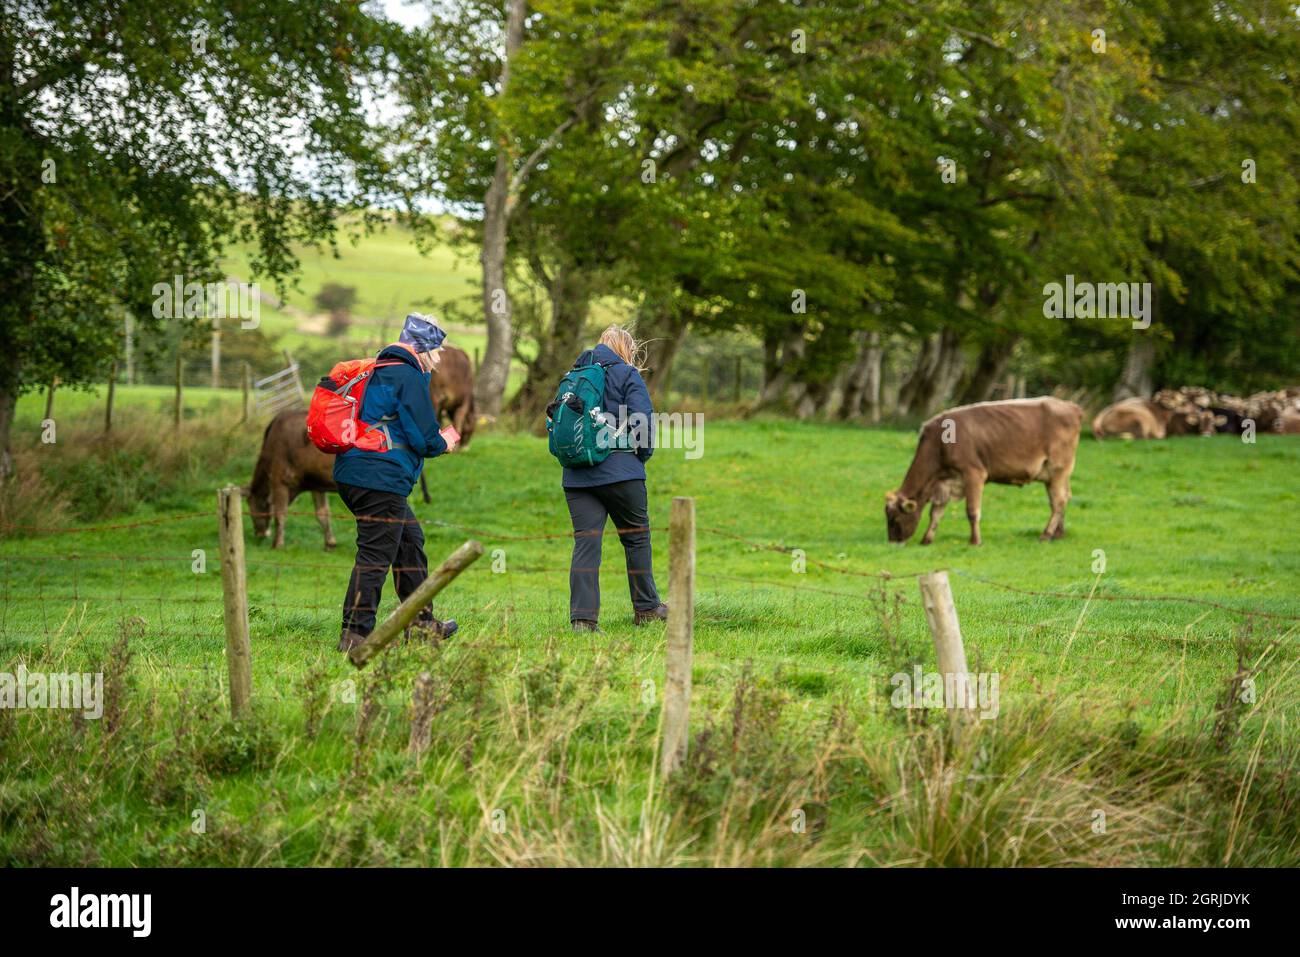 Whitewell, Clitheroe, Lancashire, UK. 1st Oct, 2021. Ramblers walking through a field of Brown Swiss cows enjoying fine weather on the first day of October before a predicted unsettled weekend, Whitewell, Clitheroe, Lancashire, UK. Credit: John Eveson/Alamy Live News Stock Photo